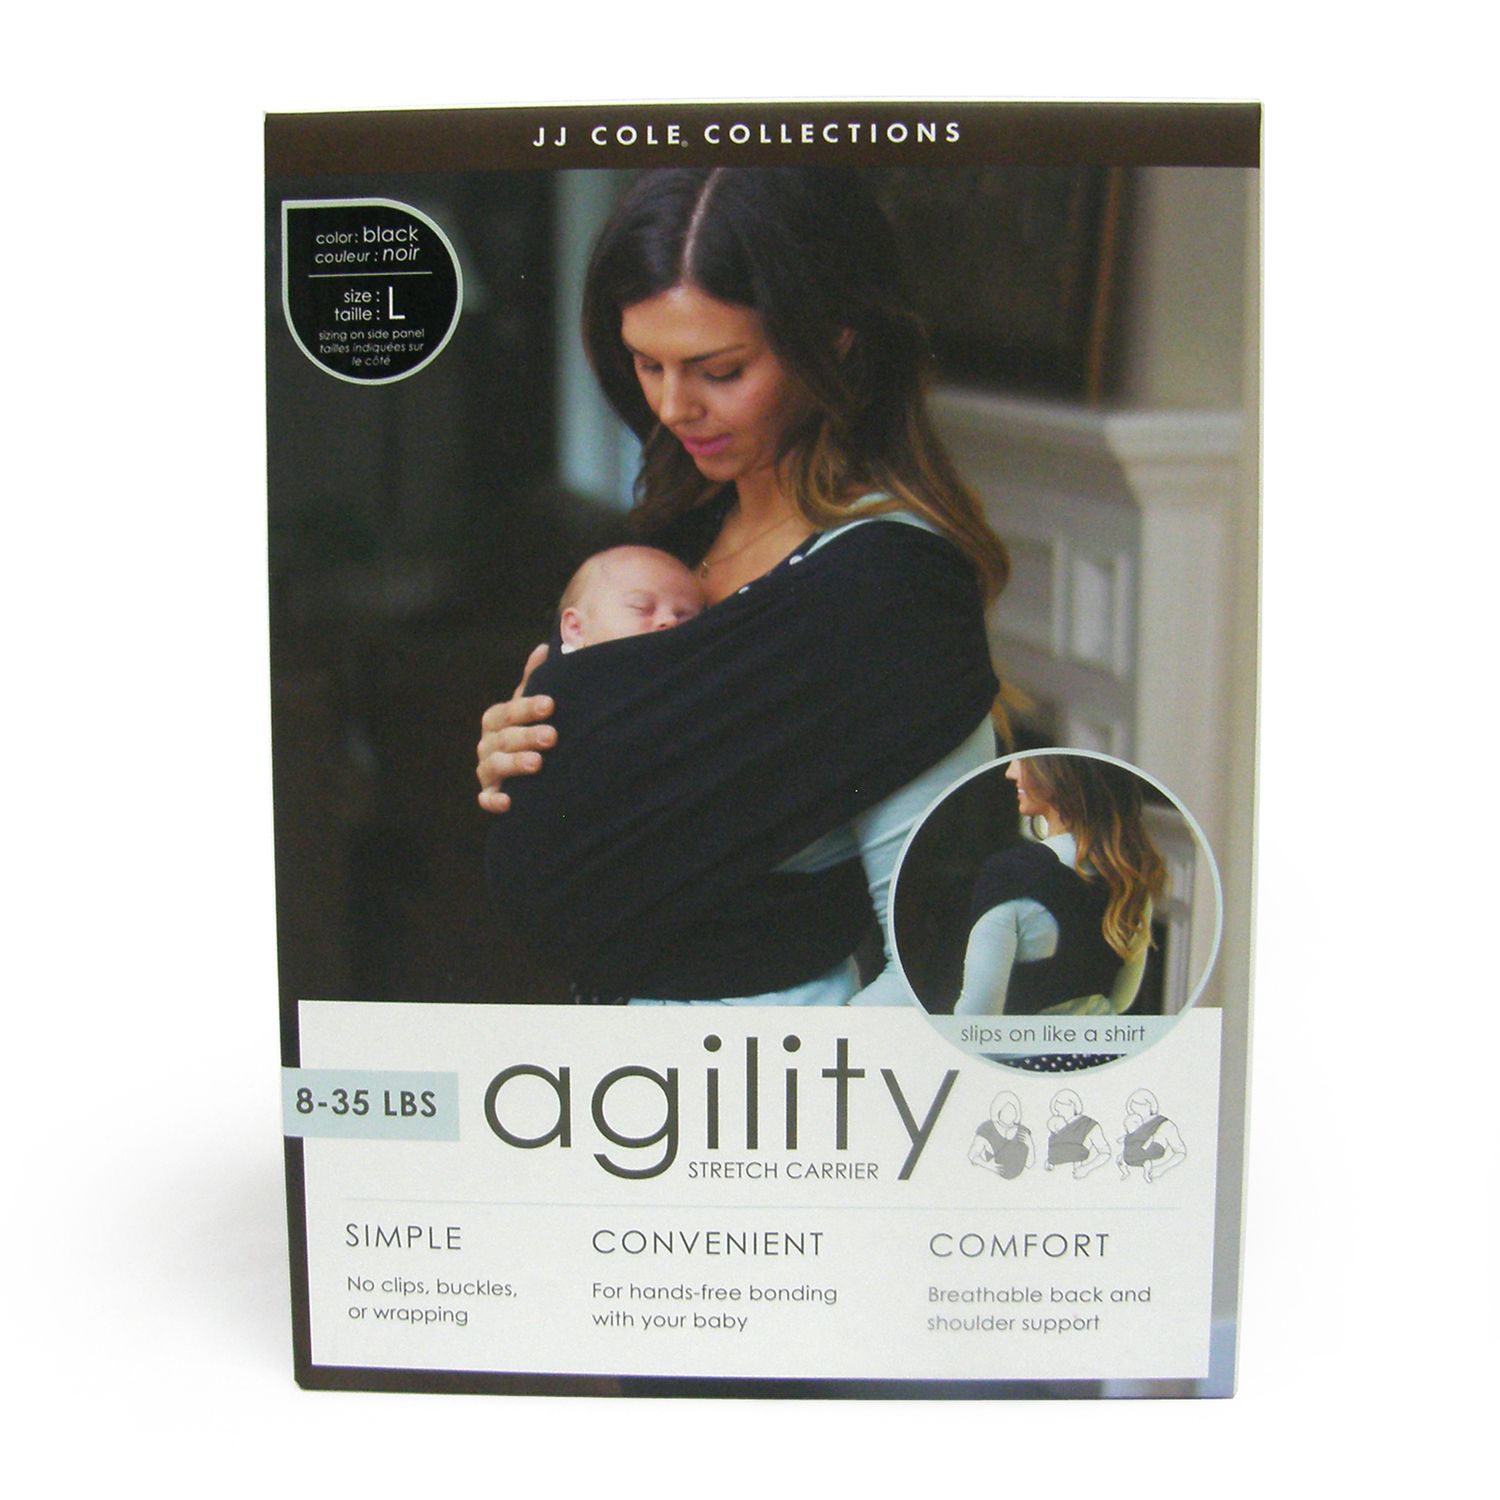 jj cole agility stretch carrier